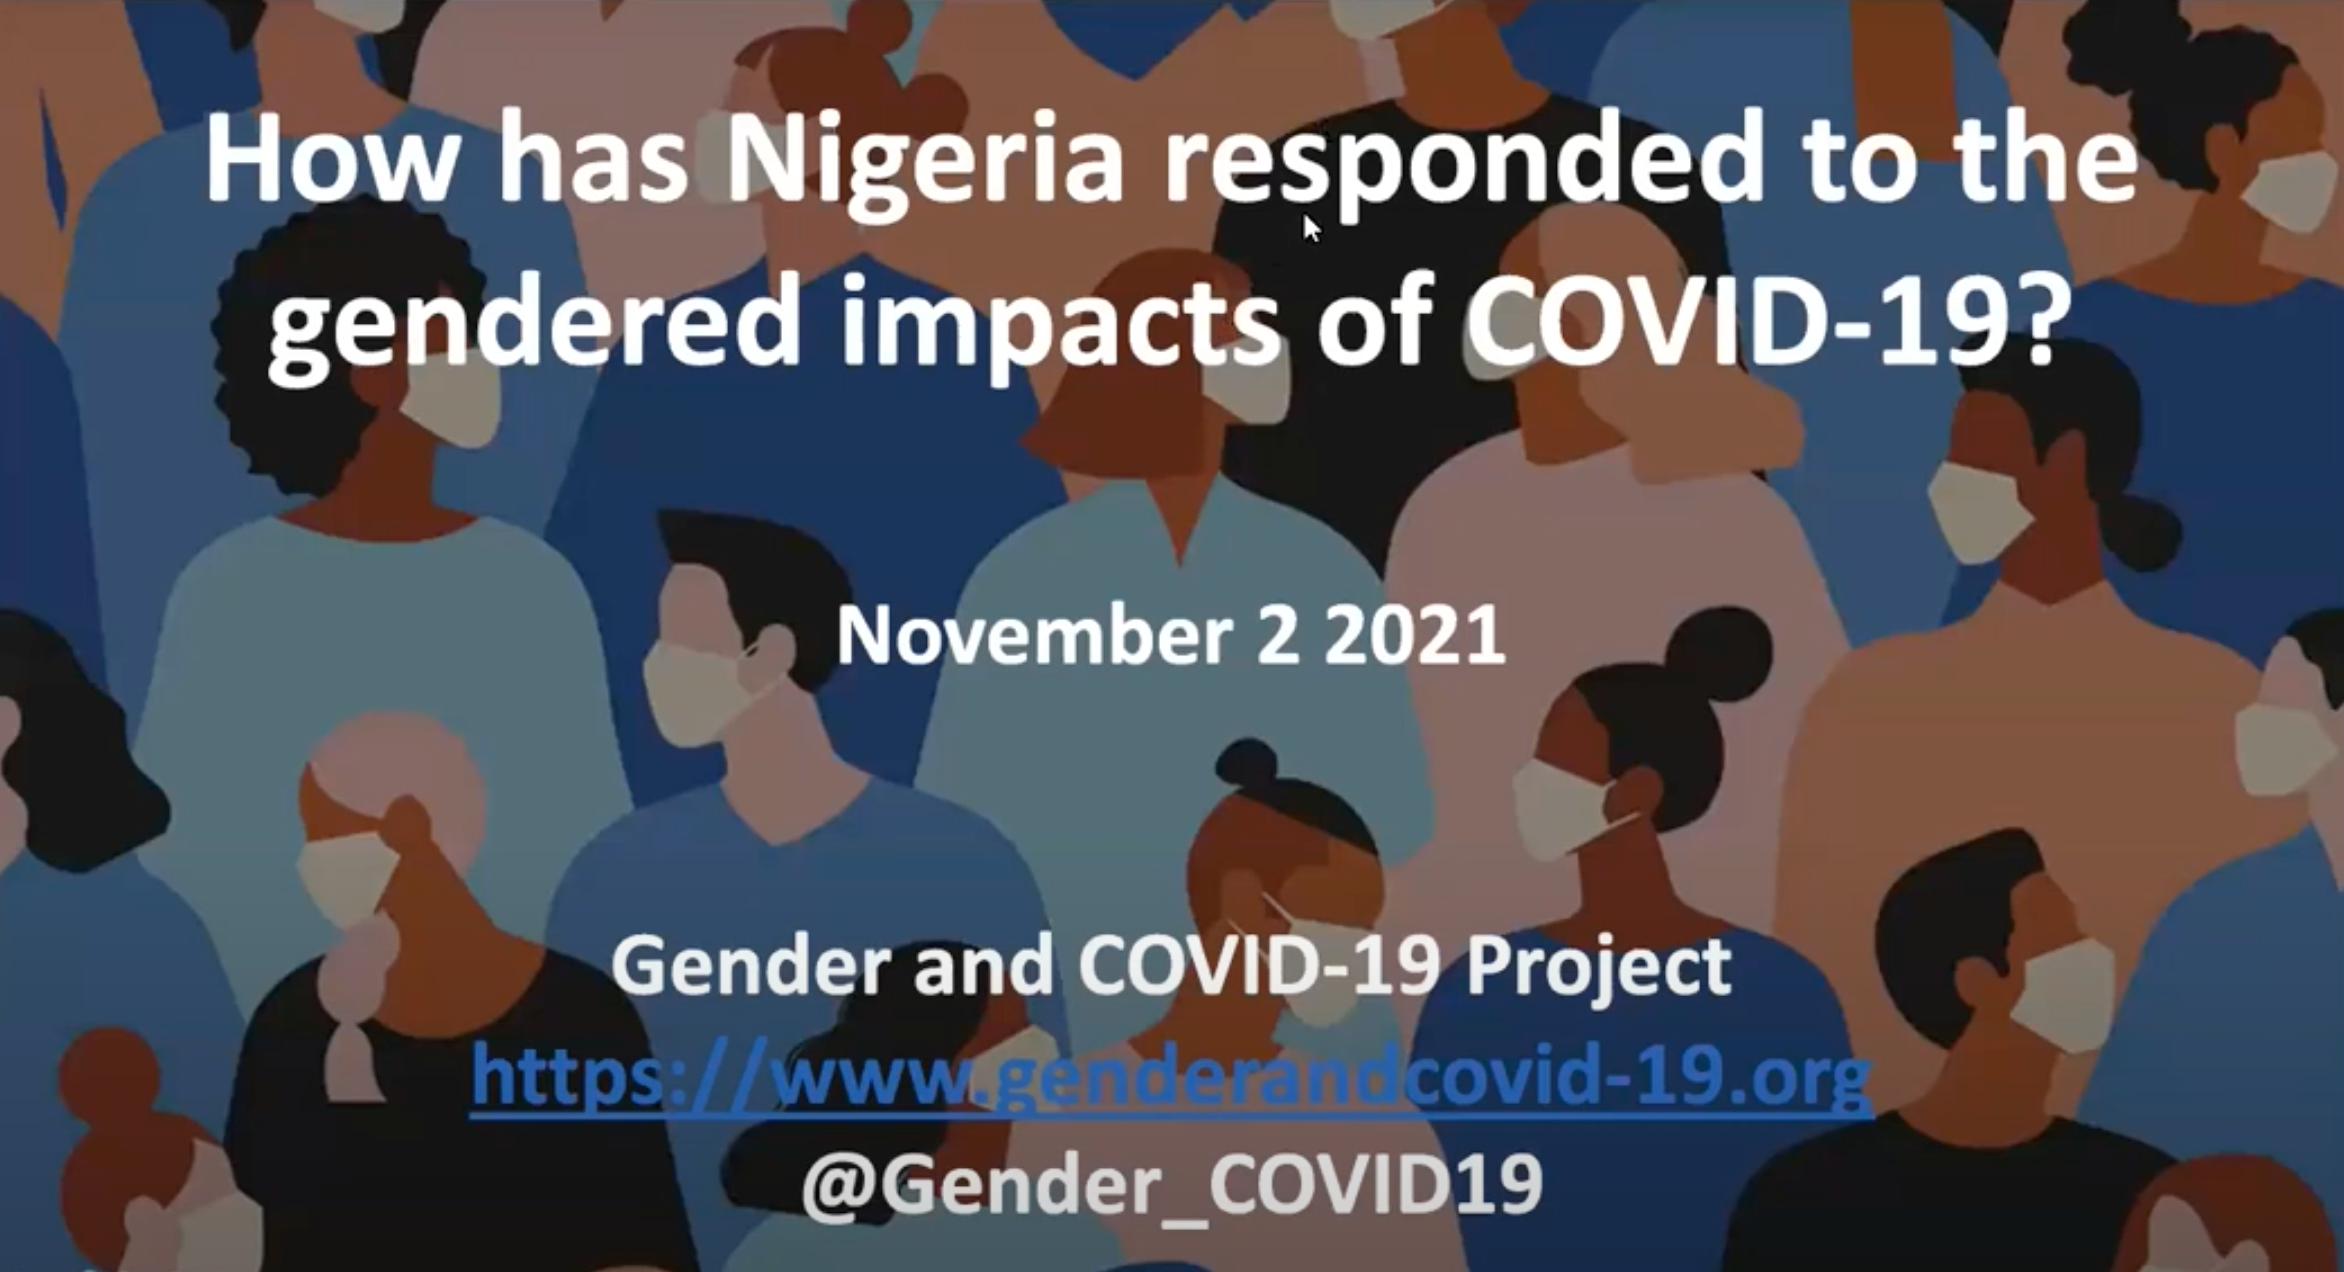 How has Nigeria responded to the gendered impacts of COVID 19